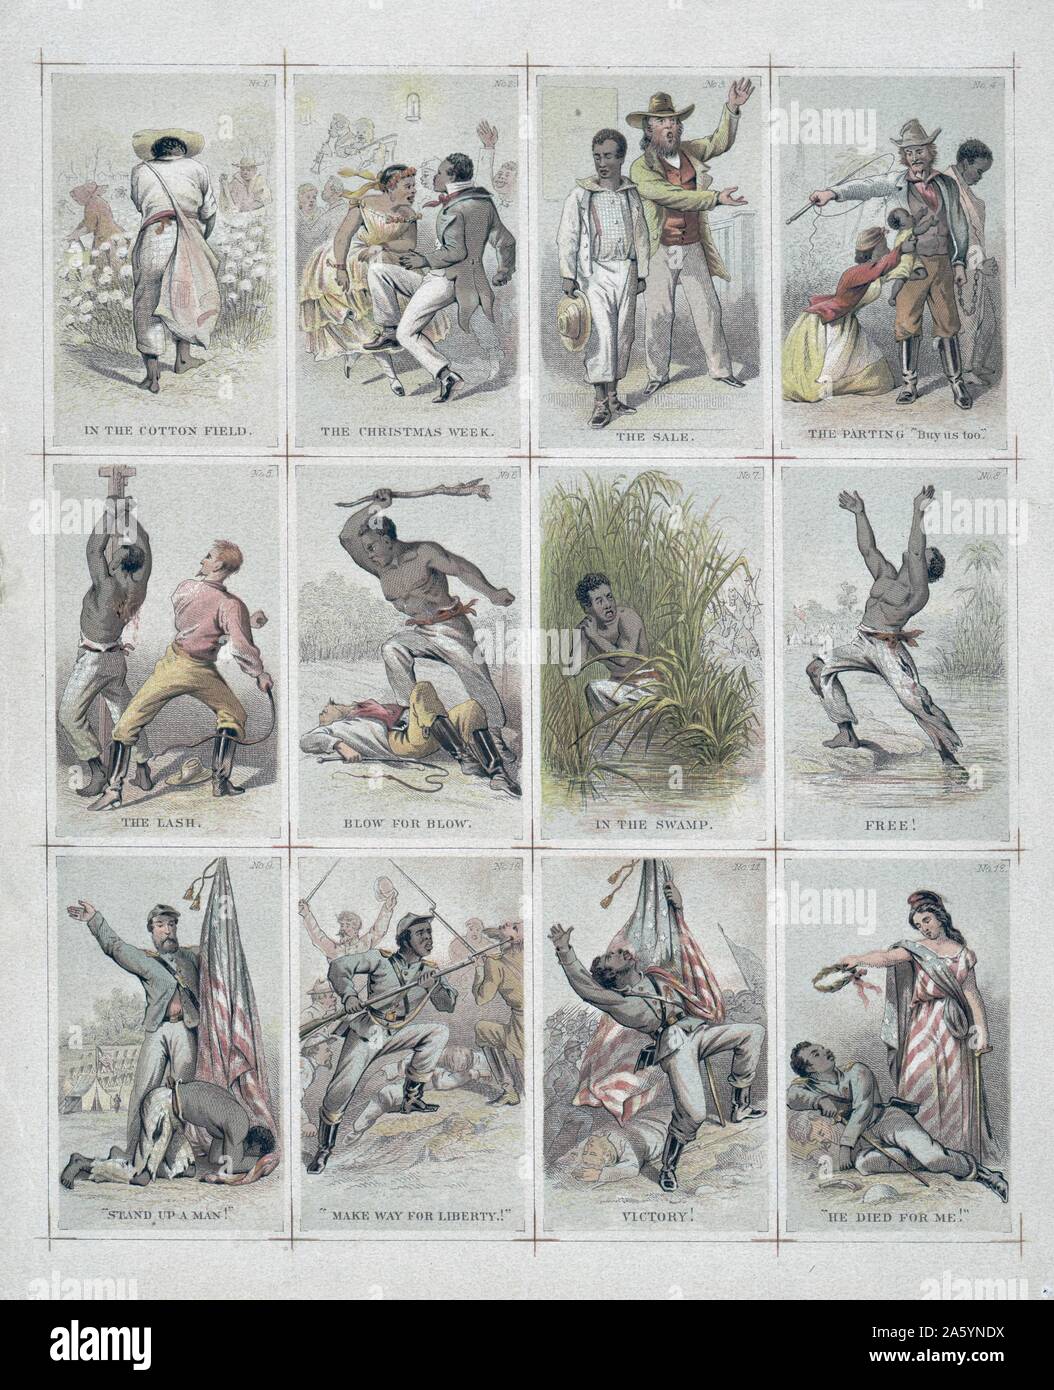 Journey of a slave from the plantation to the battlefield by James fuller Queen, 1820 or 1821-1886, artist. Uncut sheet of twelve illustrated cards presenting the journey of a slave from plantation life to the struggle for liberty, for which he gives his life, as a Union soldier during the Civil War. Stock Photo